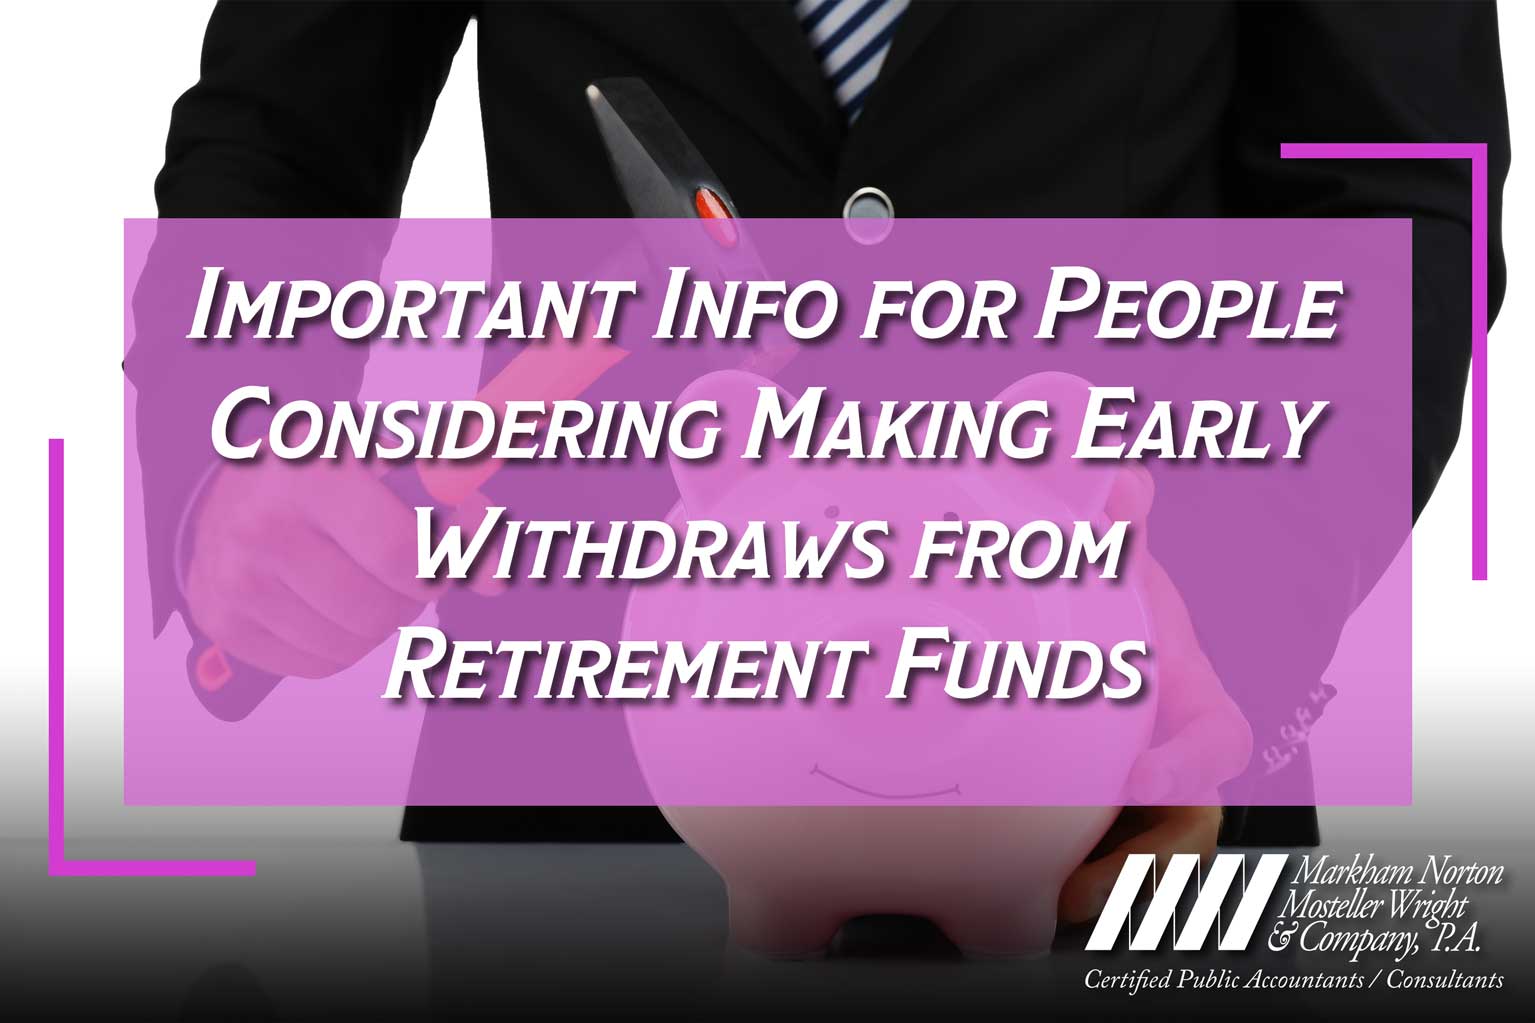 Important info for people considering making early withdraws from retirement funds